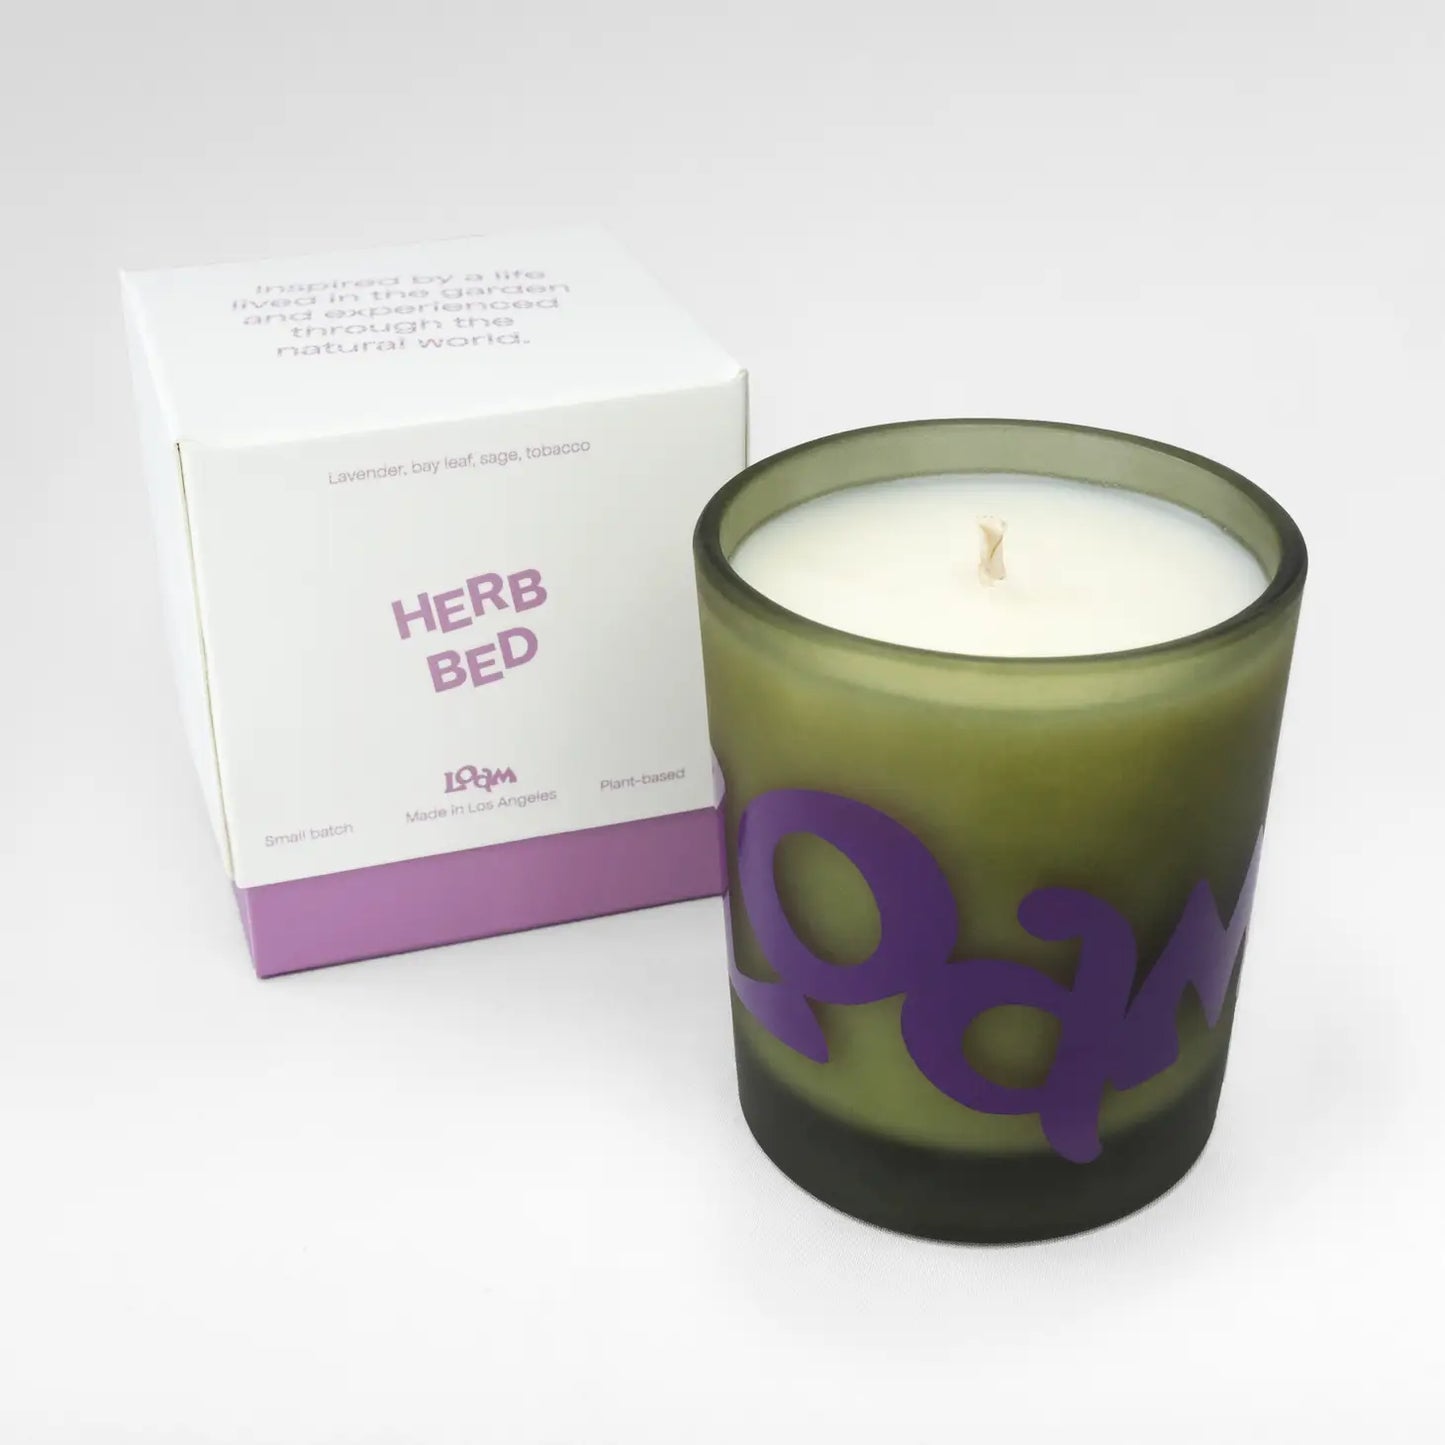 Loam’s Herb Bed Candle